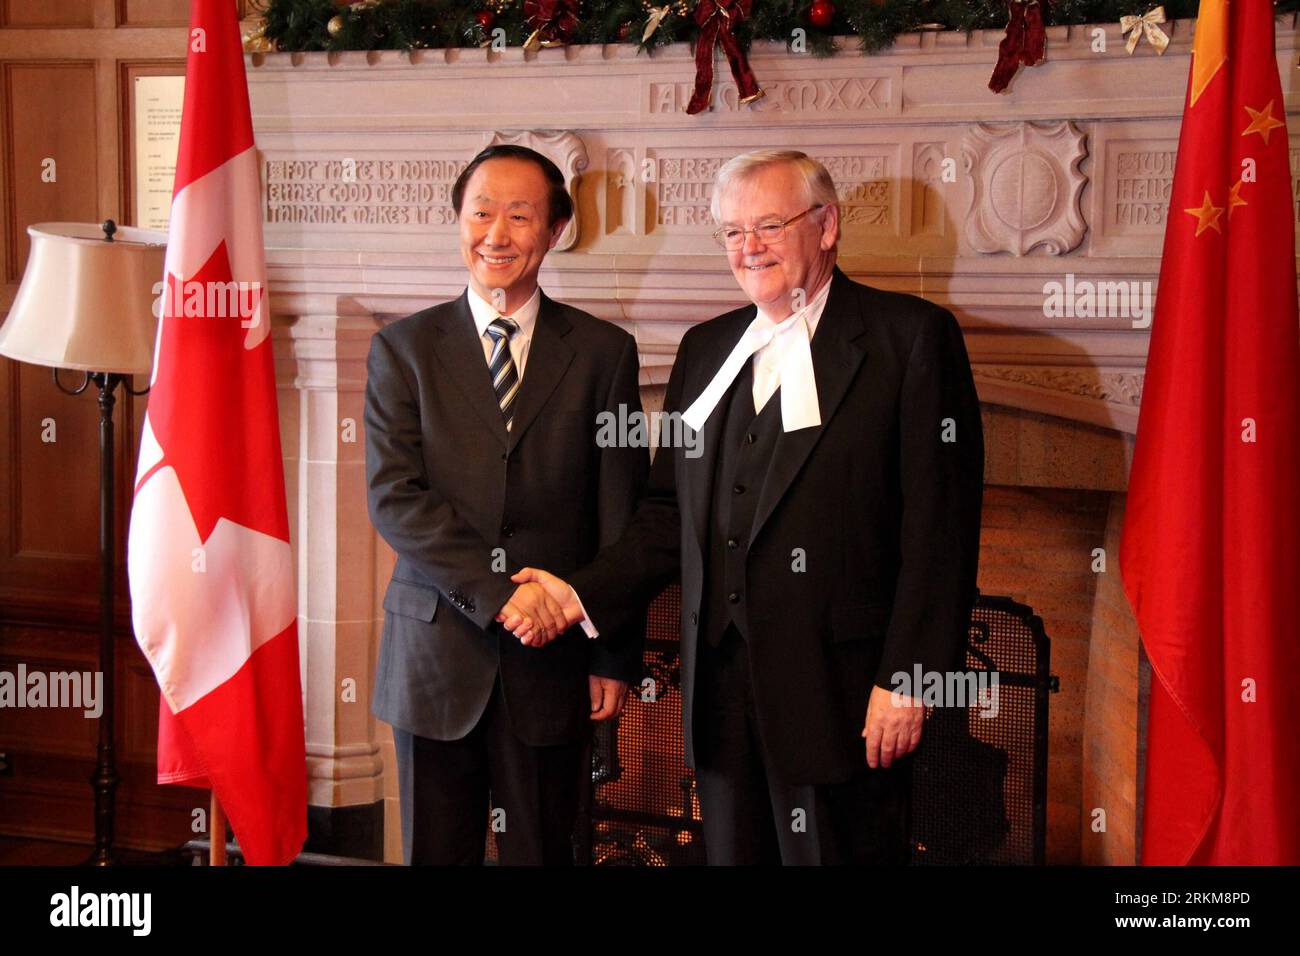 Bildnummer: 56545866  Datum: 21.10.2011  Copyright: imago/Xinhua (111202) -- OTTAWA, Dec. 2, 2011 (Xinhua) -- Canadian Senate Speaker Noel Kinsella (R) shakes hands with Wang Jiarui, head of the International Department of the Communist Party of China Central Committee, in a meeting room of the Senate on Parliament Hill in Ottawa, Ontario, Canada, on Oct. 21, 2011. Wang is leading a delegation of the Communist Party of China on a visit to Canada to further promote bilateral relations. (Xinhua/Zhang Dacheng)(ctt) CANADA-CHINA-CPC-WANG JIARUI PUBLICATIONxNOTxINxCHN People Politik x0x xtm 2011 qu Stock Photo